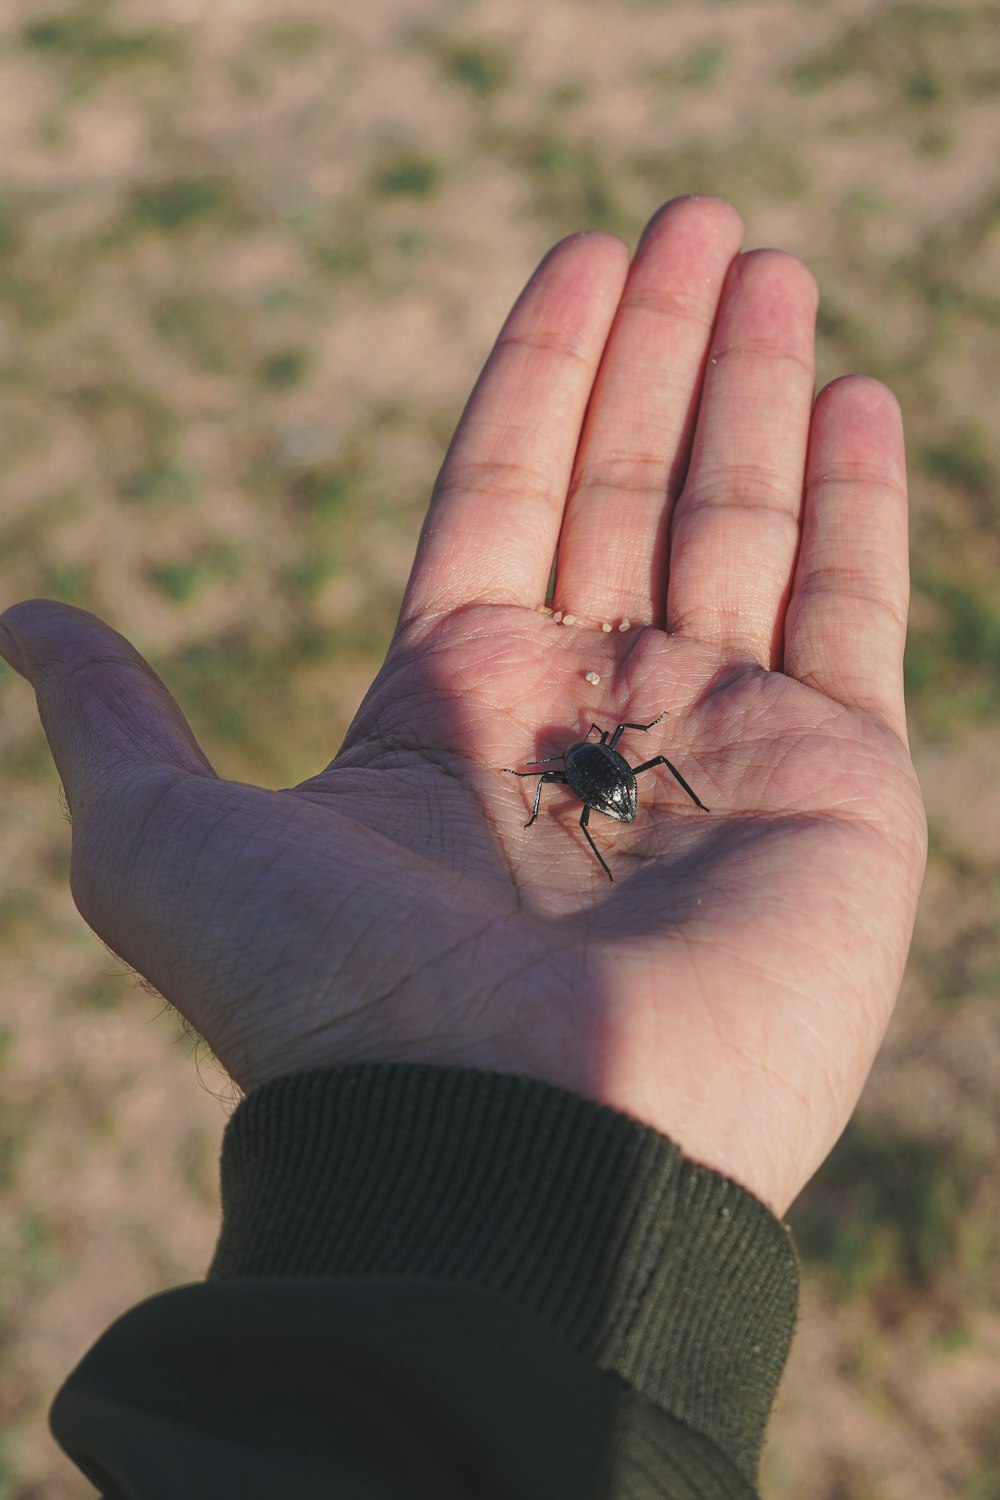 a person's hand holding a small insect in it's palm